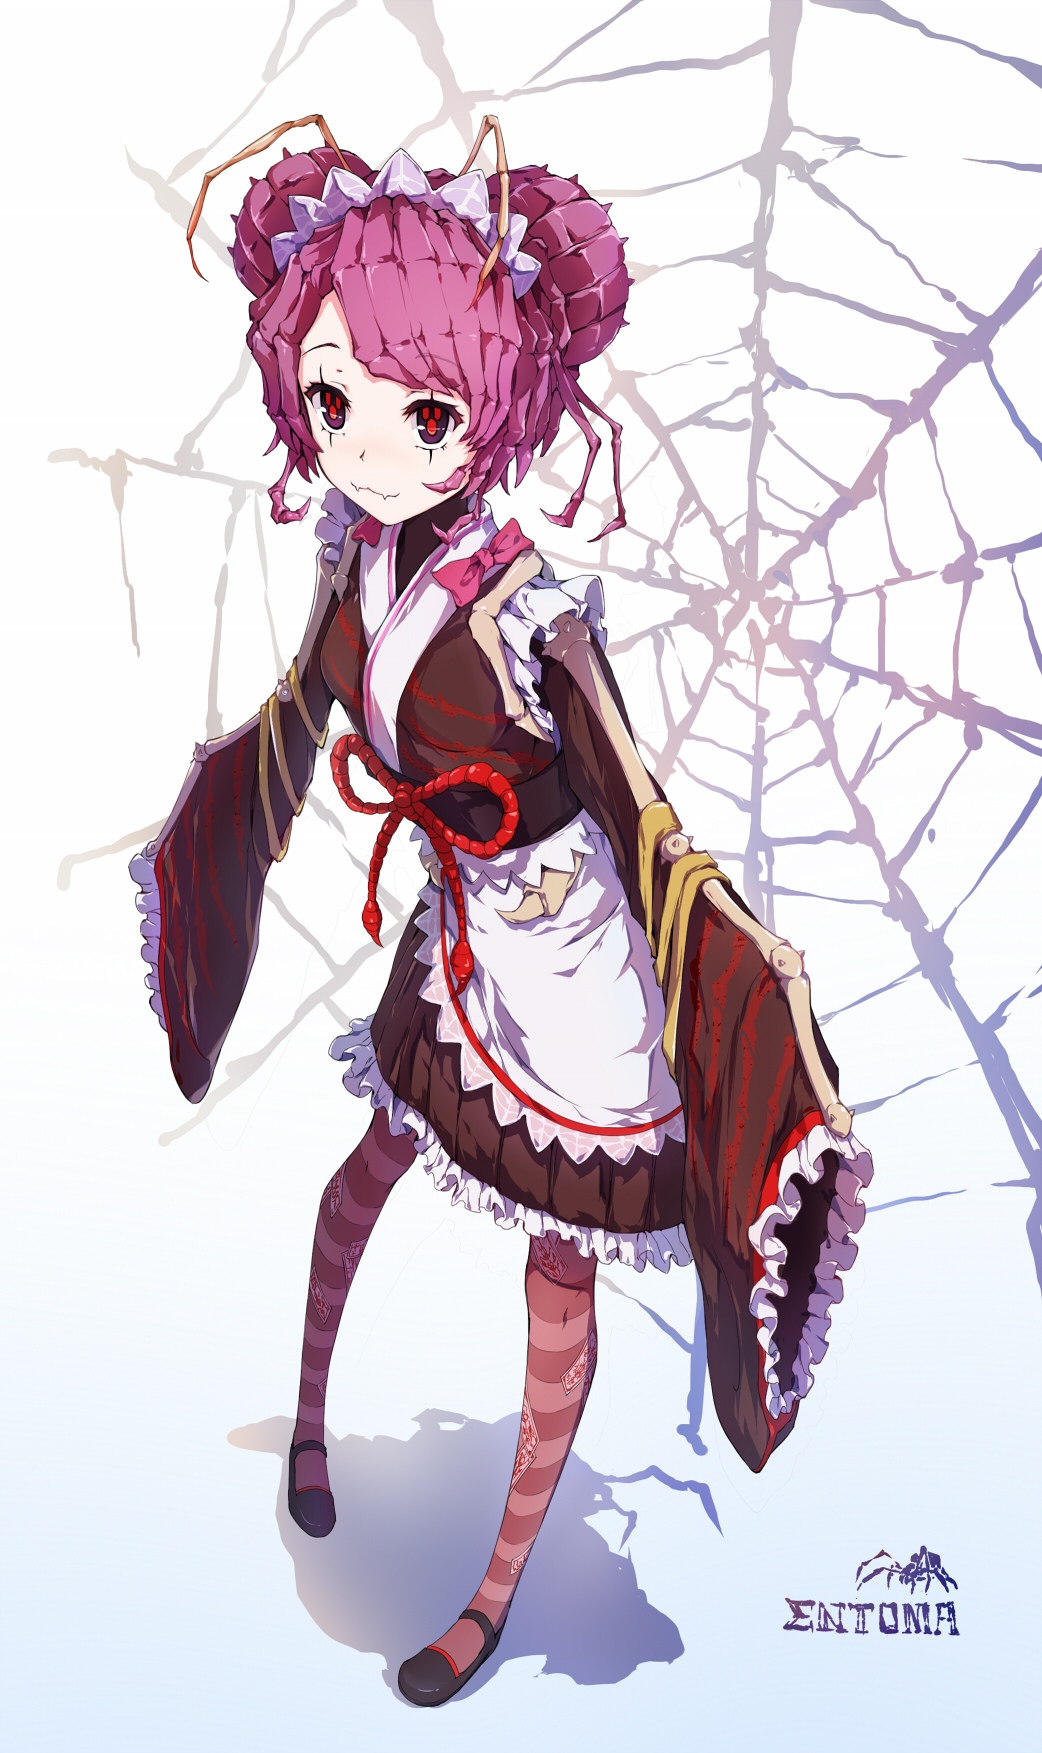 Anime 1042x1753 Overlord (anime) anime girls bones small boobs loli thighs black heels maid outfit odango monster girl spiderwebs portrait display smiling symbol-shaped pupils 2D Entoma Vasilissa Zeta long hair pink hair hair in face bangs looking at viewer pantyhose striped stockings fan art red eyes hairbun